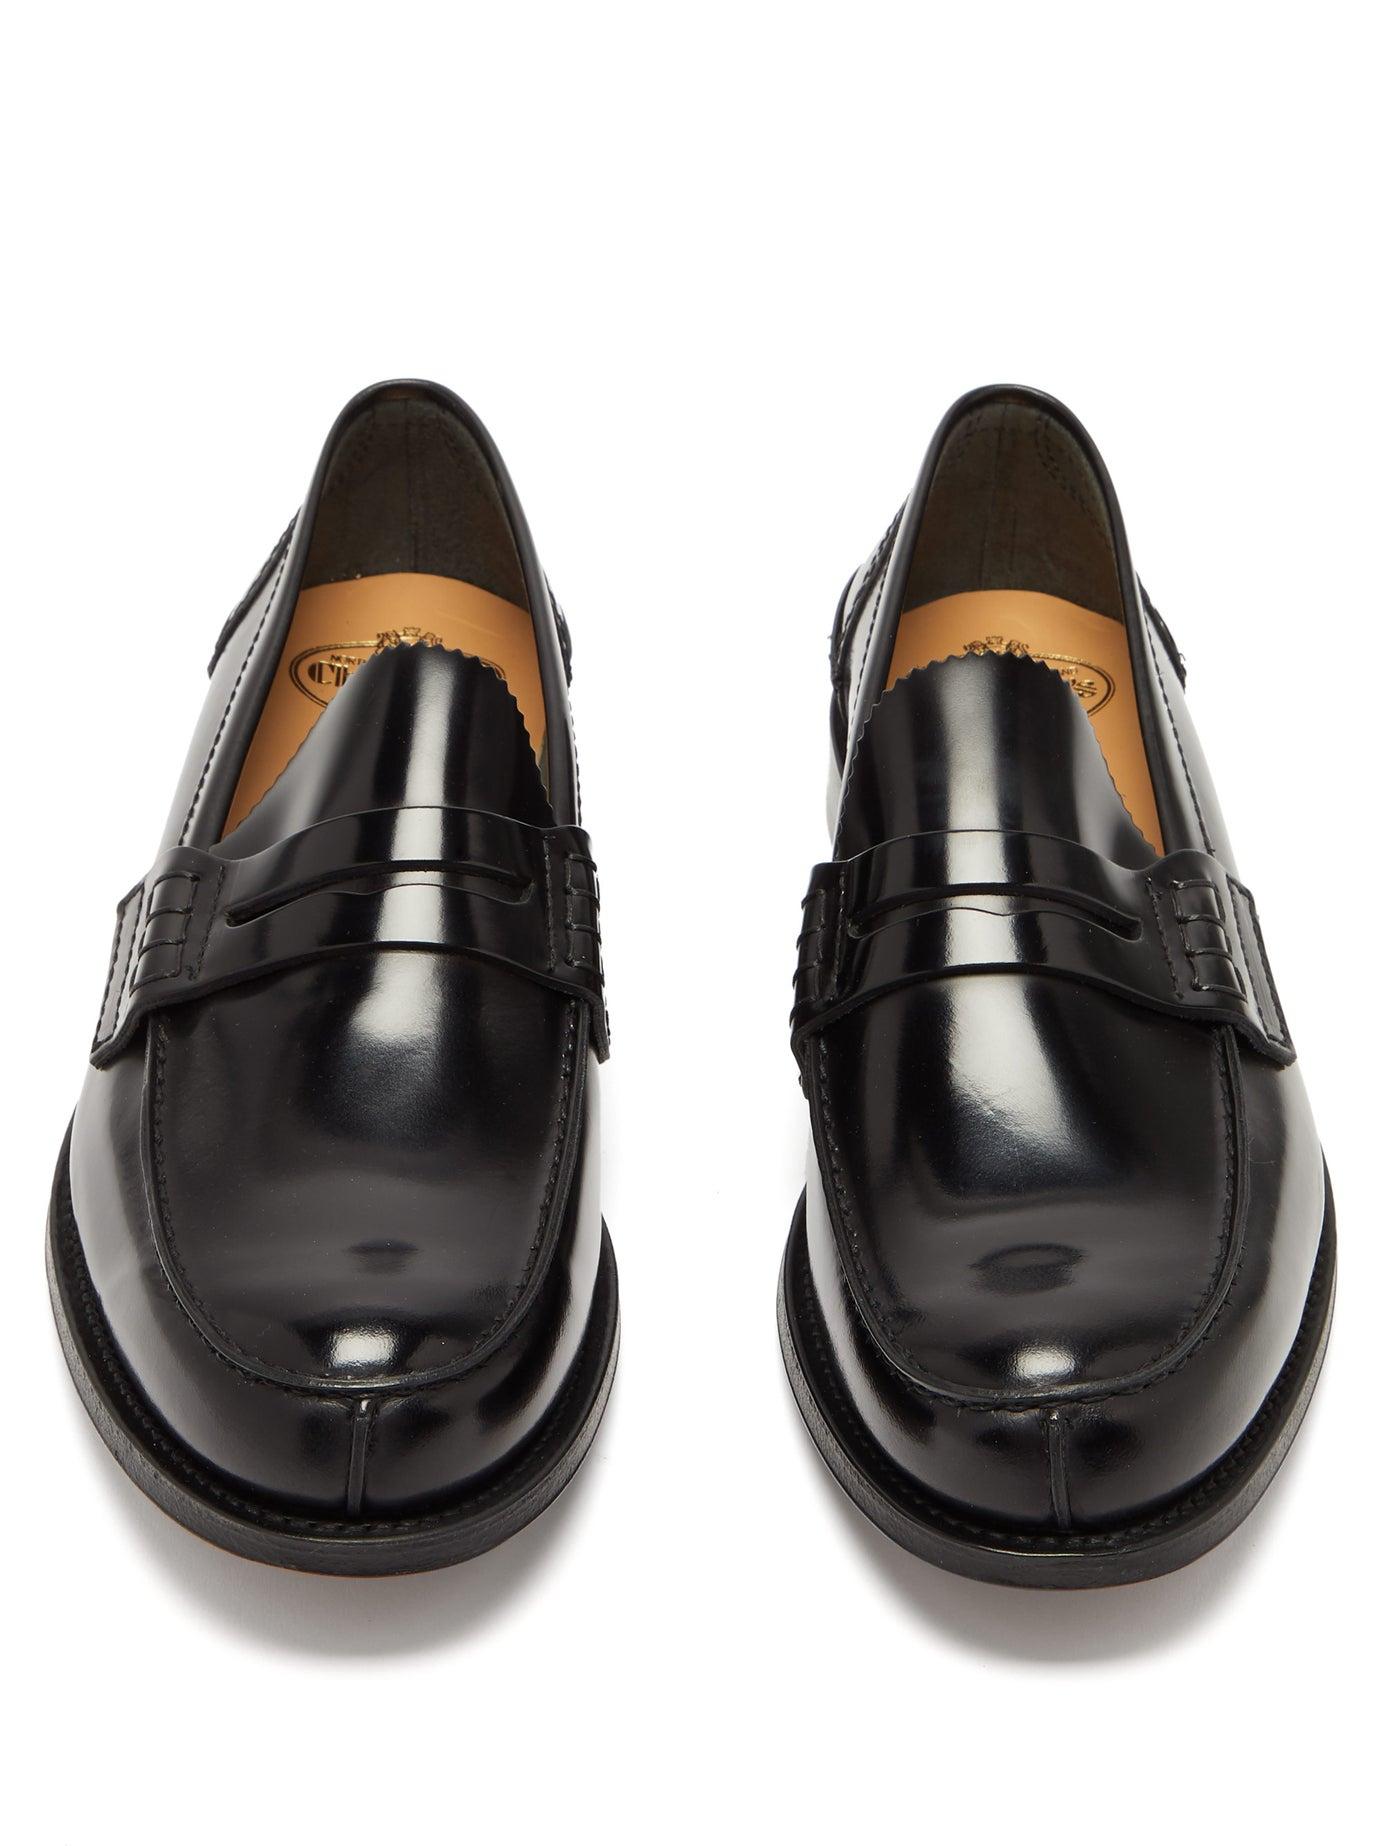 Church's Tunbridge Leather Penny Loafers in Black for Men - Lyst